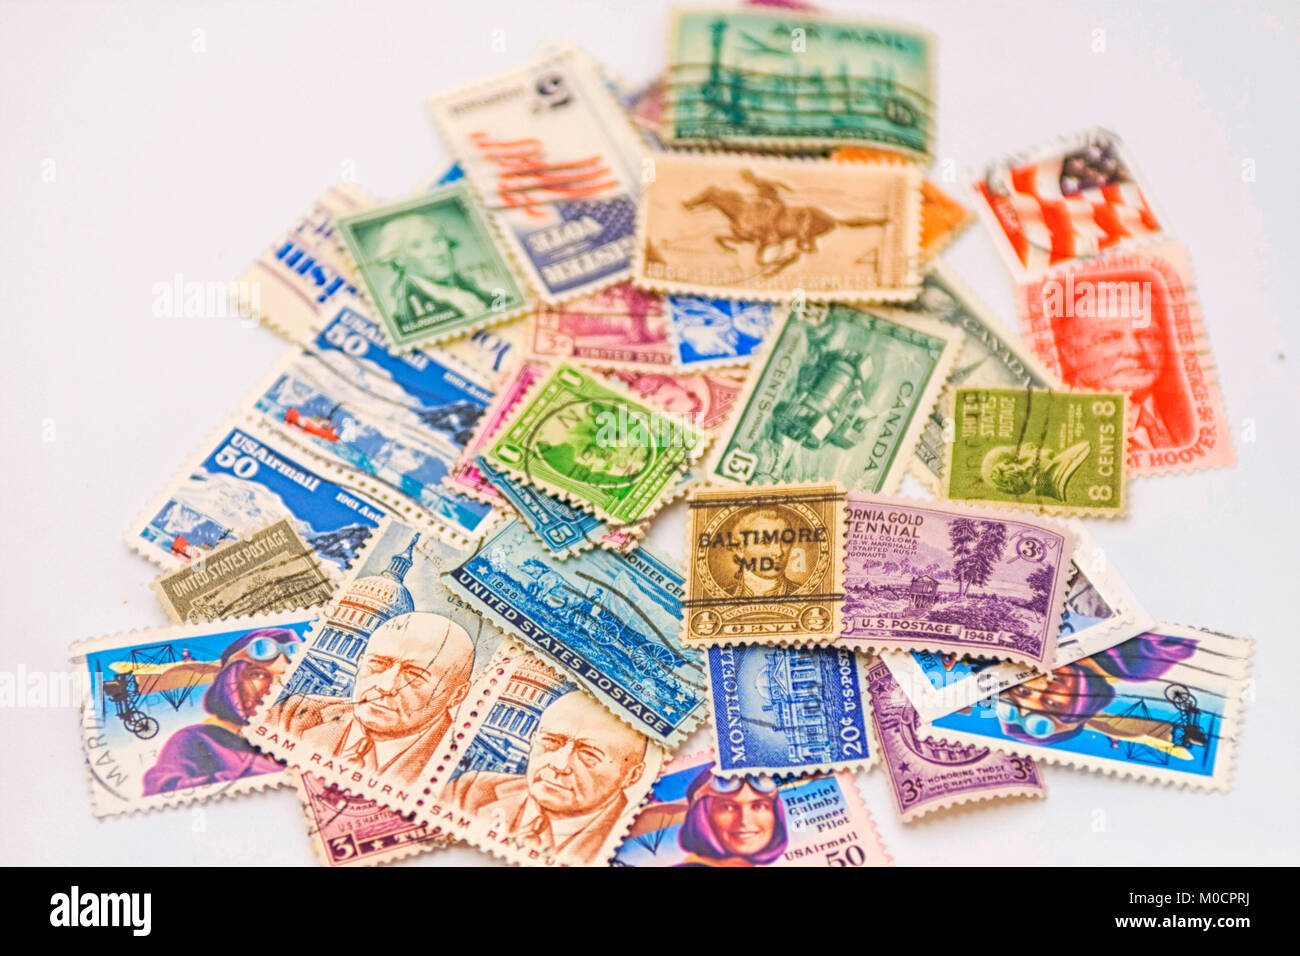 Bunch of old american postage stamps Stock Photo